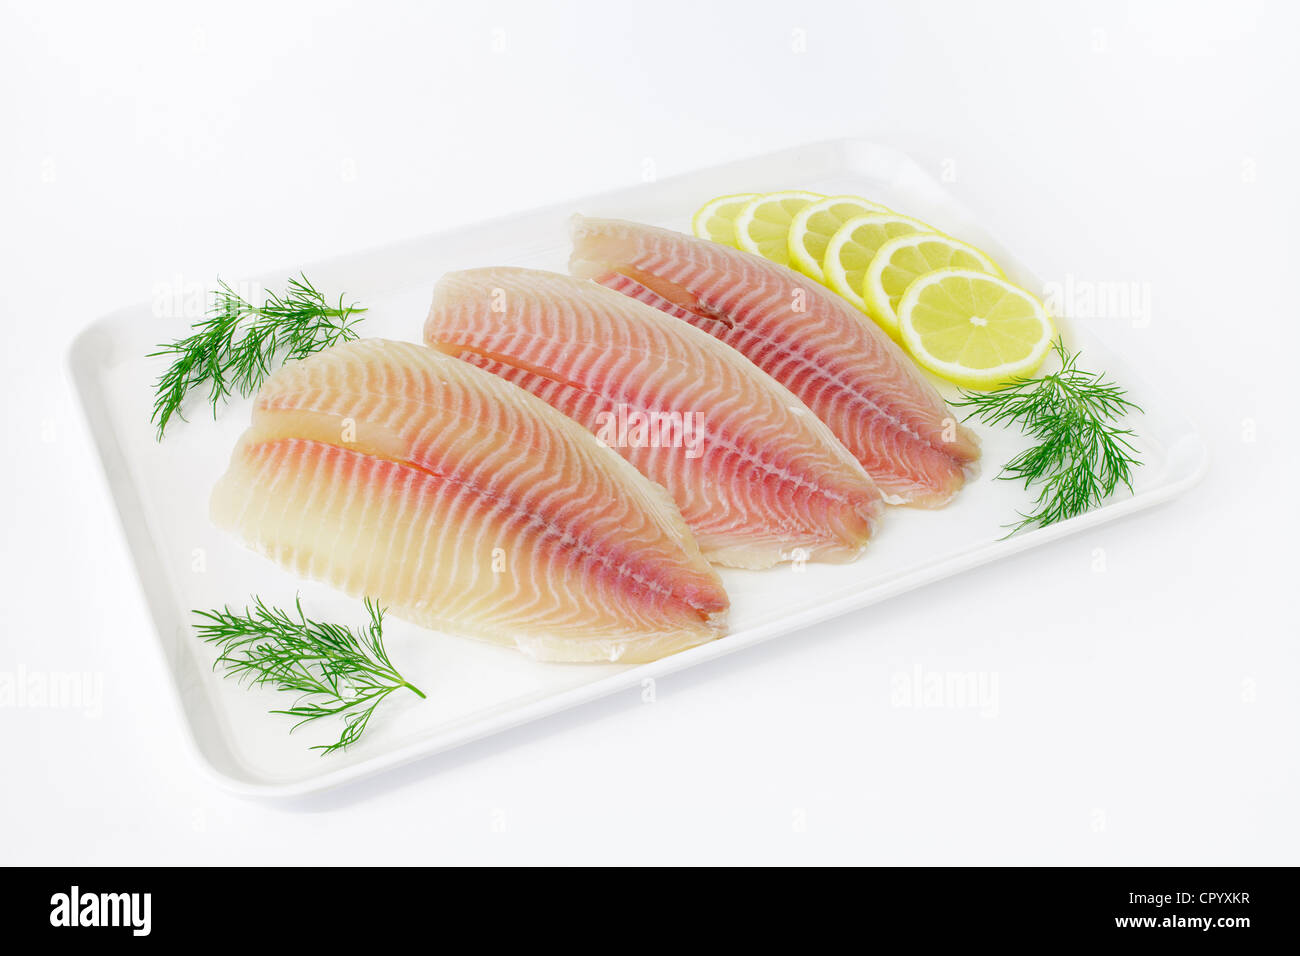 Tilapia fillets on a plate with lemon and dill Stock Photo